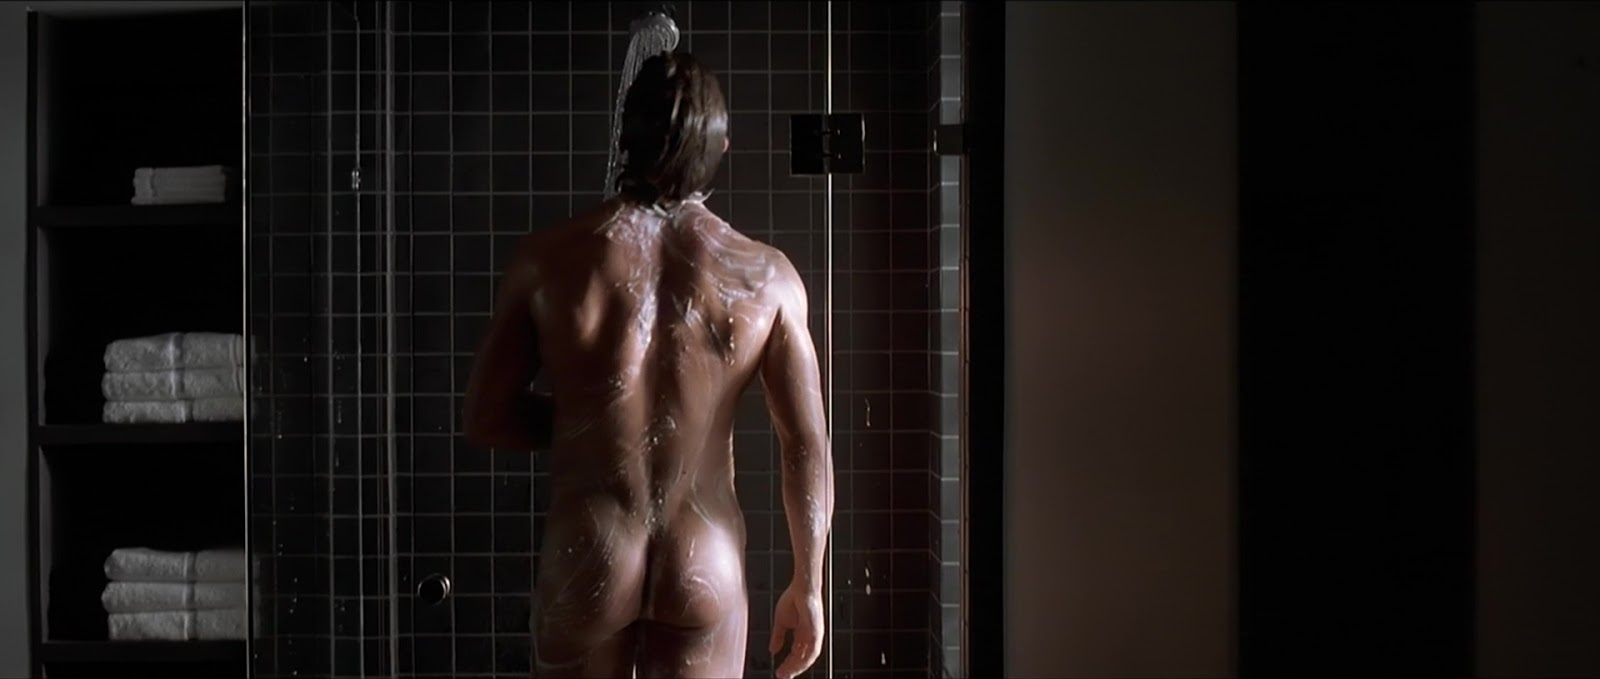 Christian Bale nude in American Psycho.